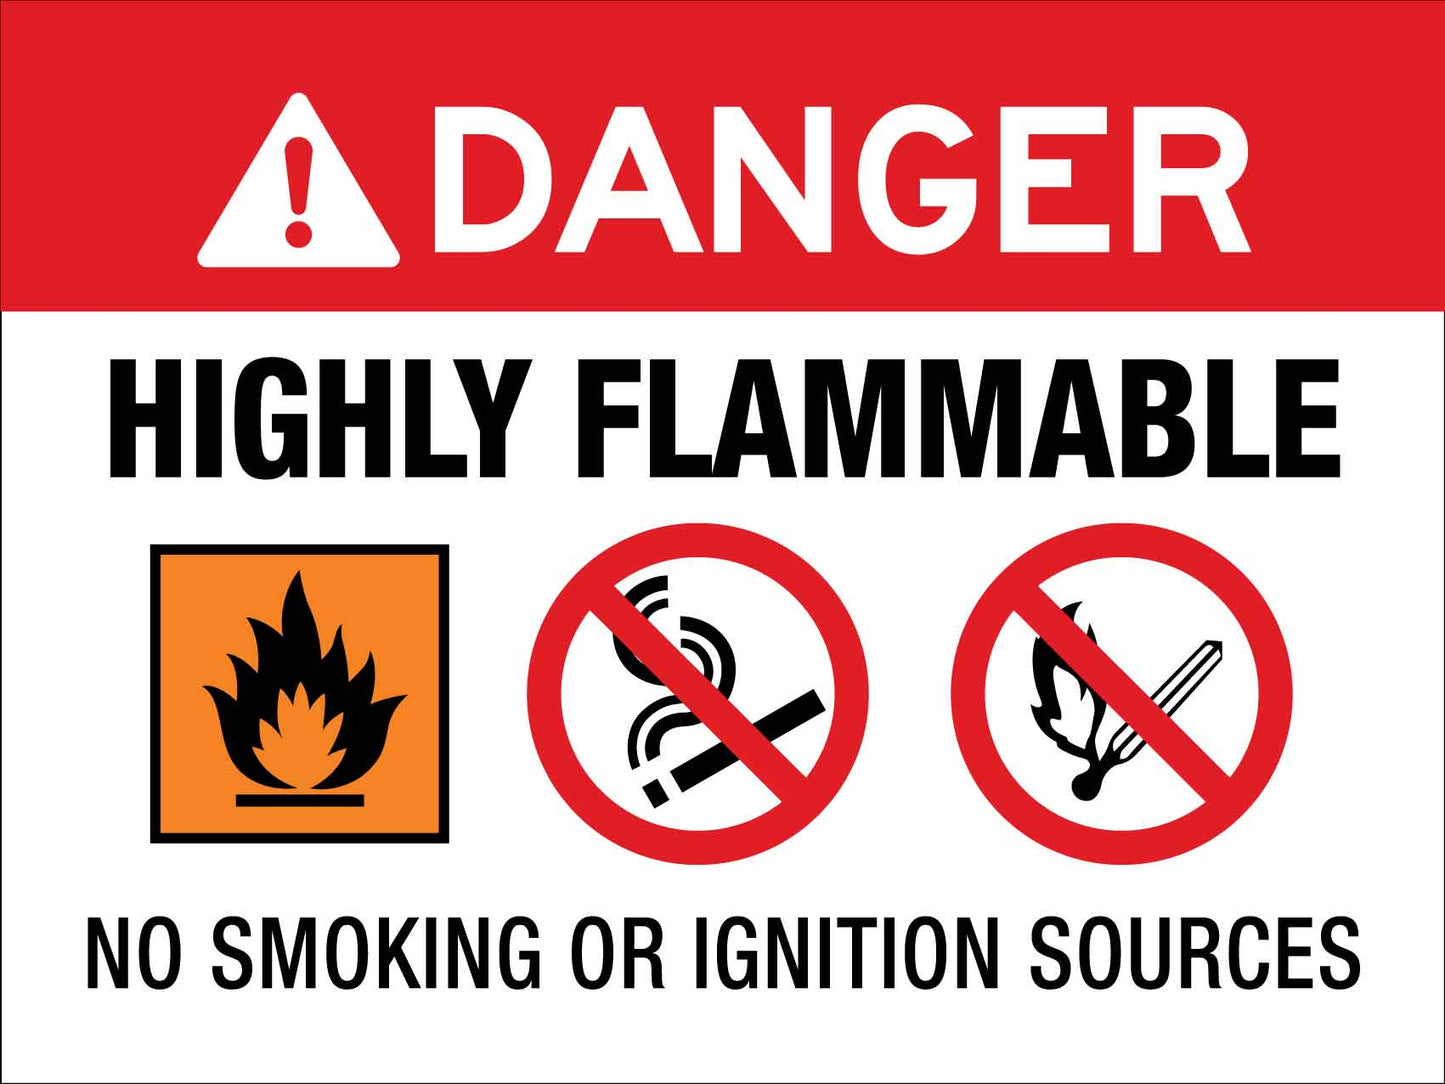 Danger Highly Flammable No Smoking or Ignition Sources Sign